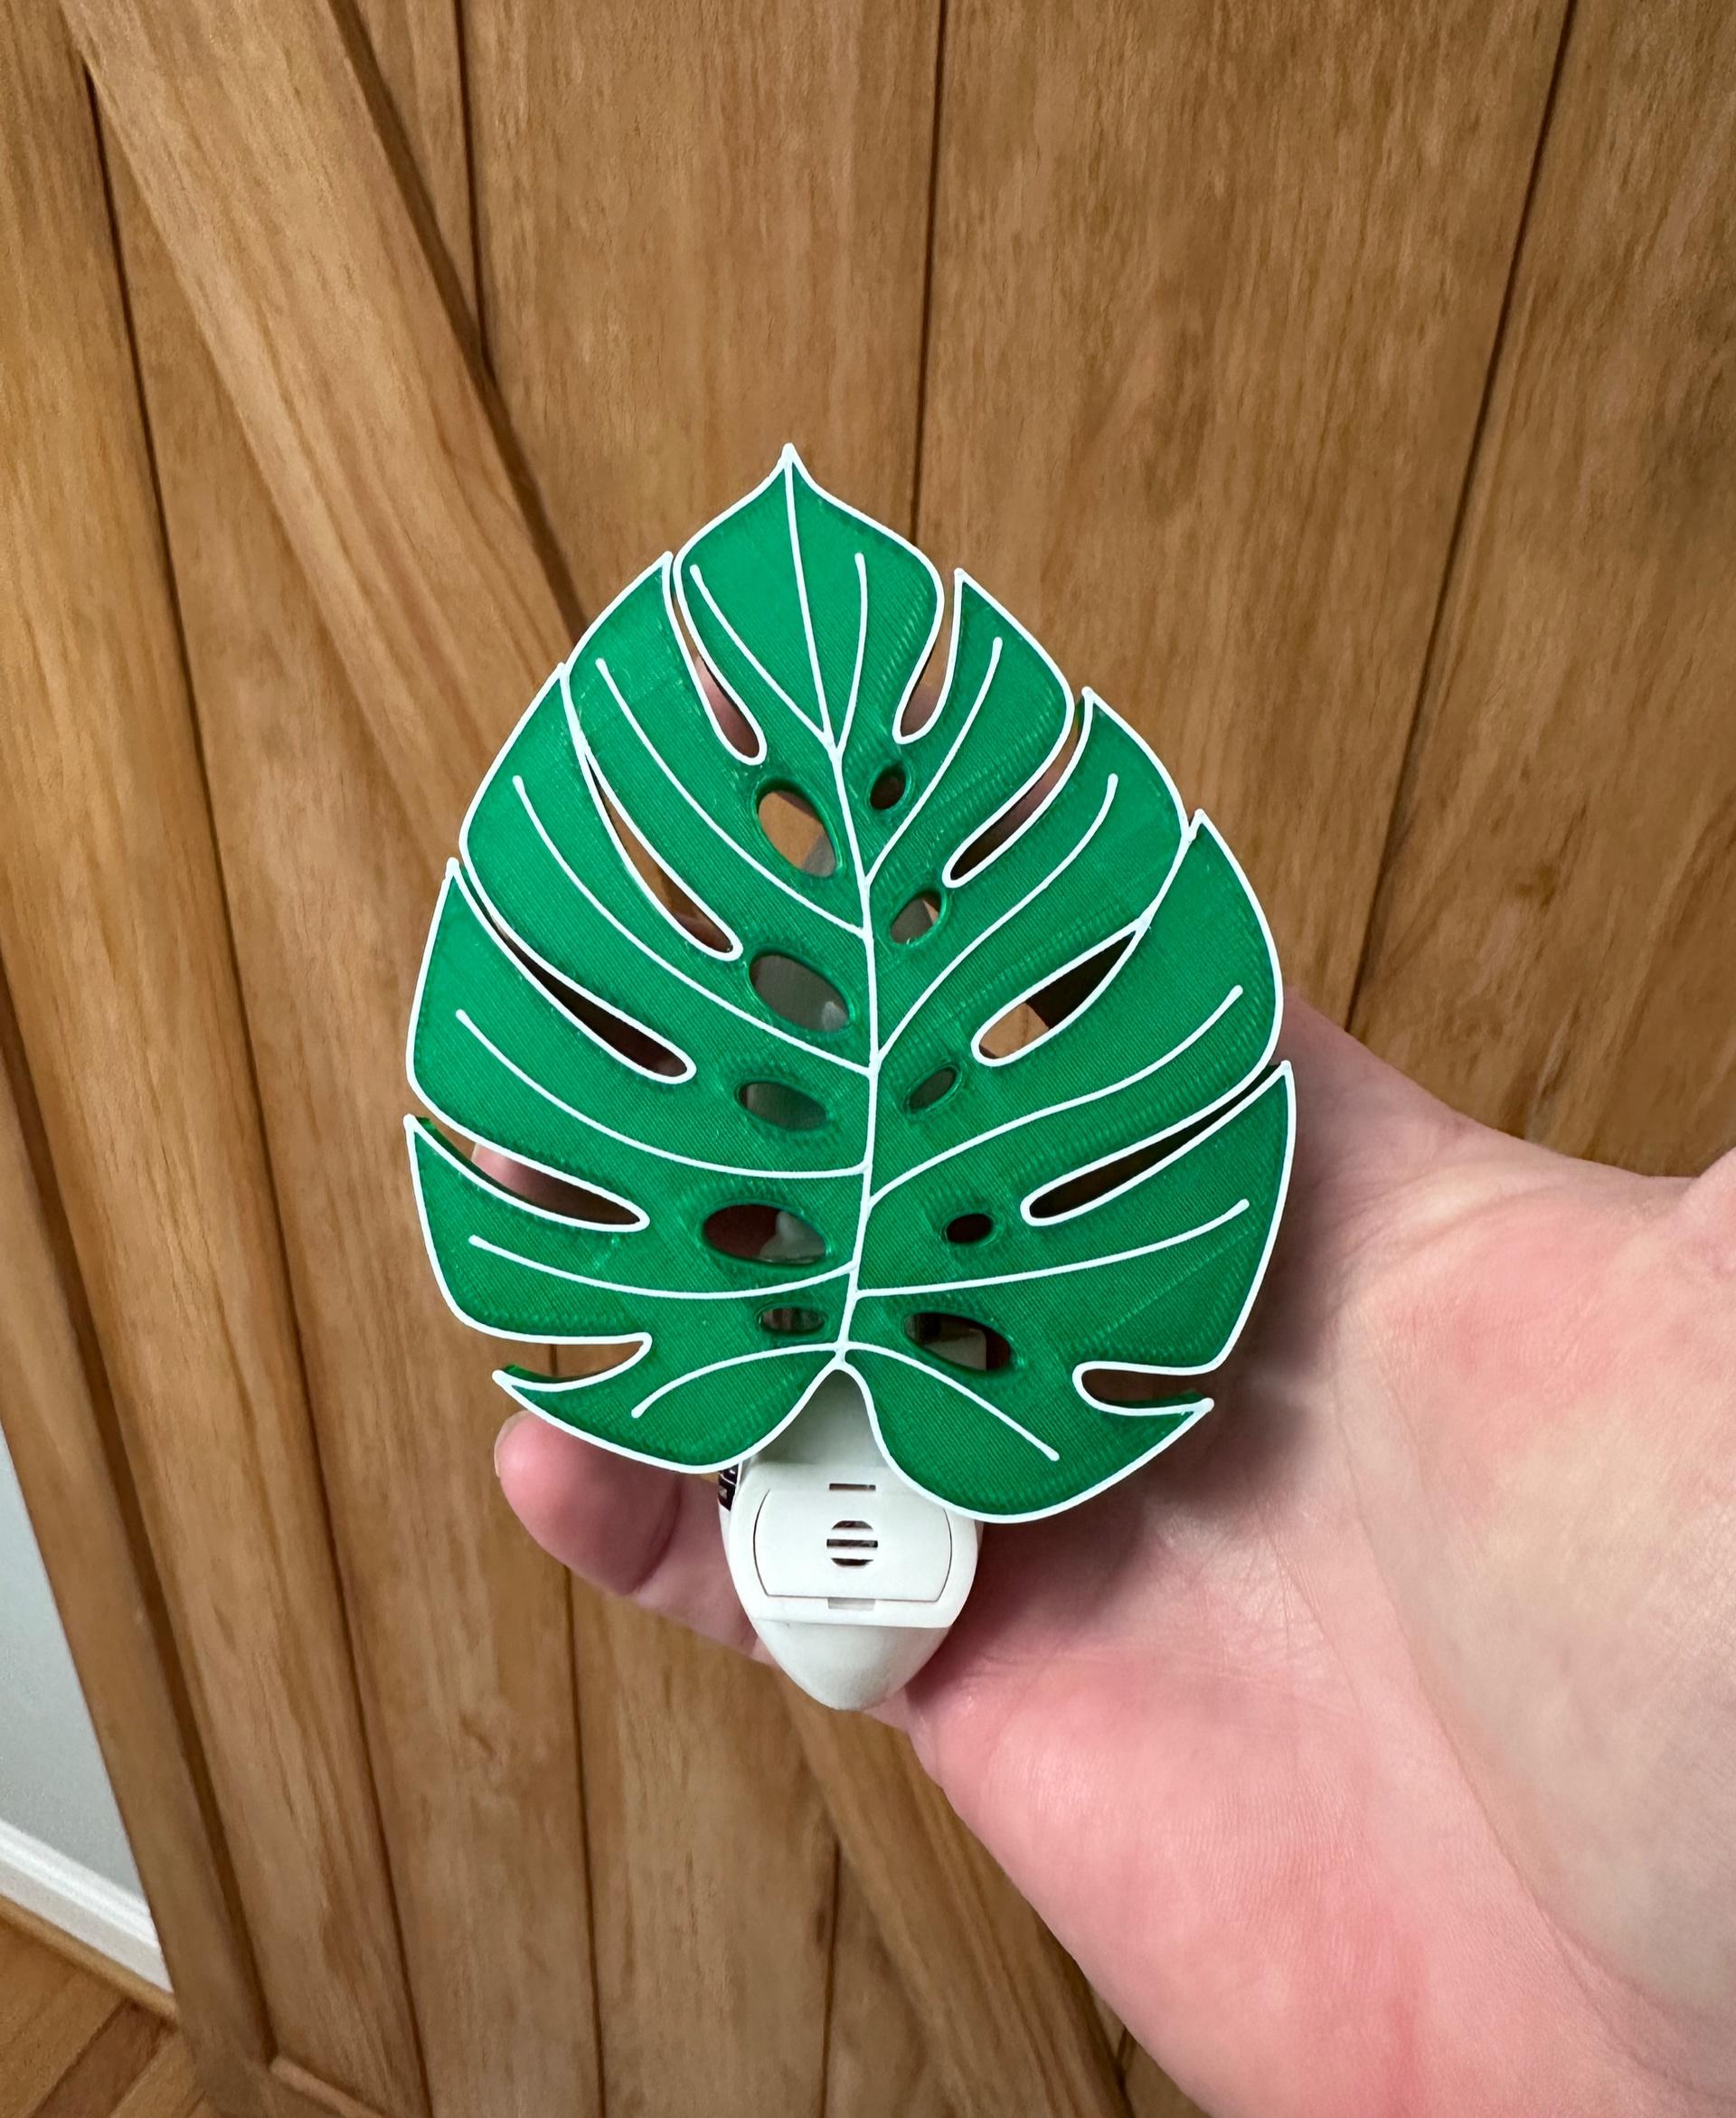 Monstera Leaf Magnet - Minor tweaks and created this super cute nightlight. 

Used PETG transparent green and white filament. 
Overture Clear Green (PETG)
Overture White (PETG) - 3d model